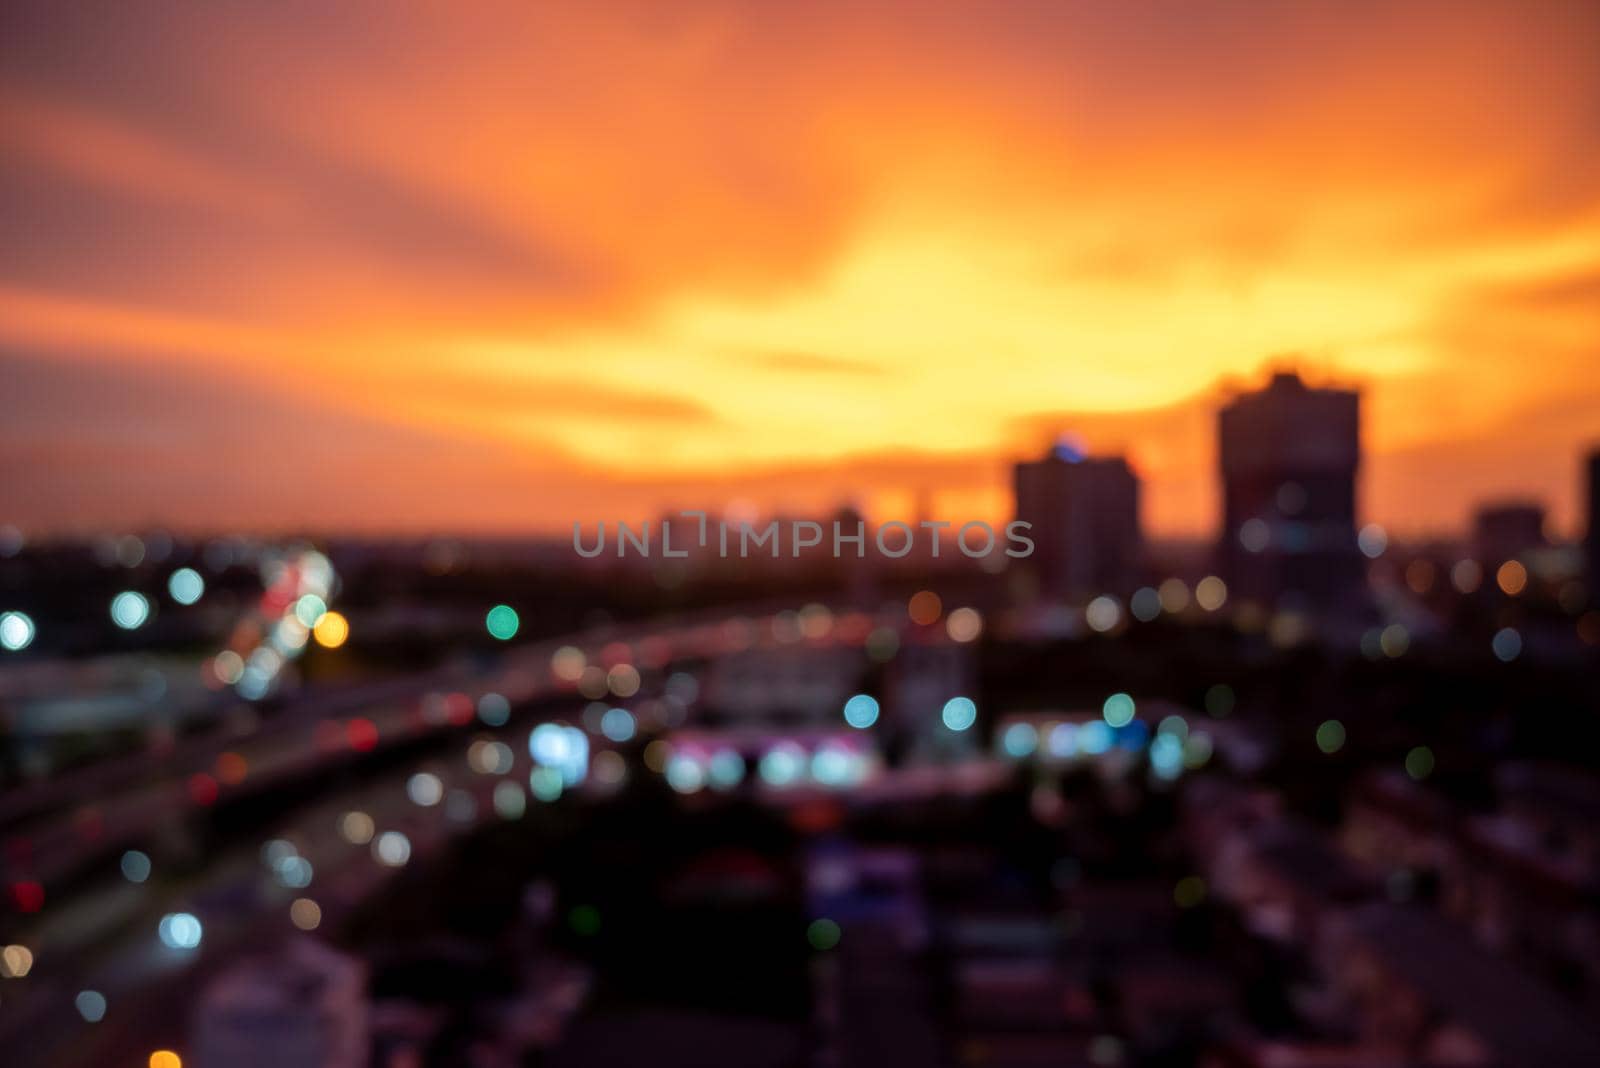 Blur photo background of Bangkok cityscape at twilight time, building skyscraper and creative office in the downtown district.